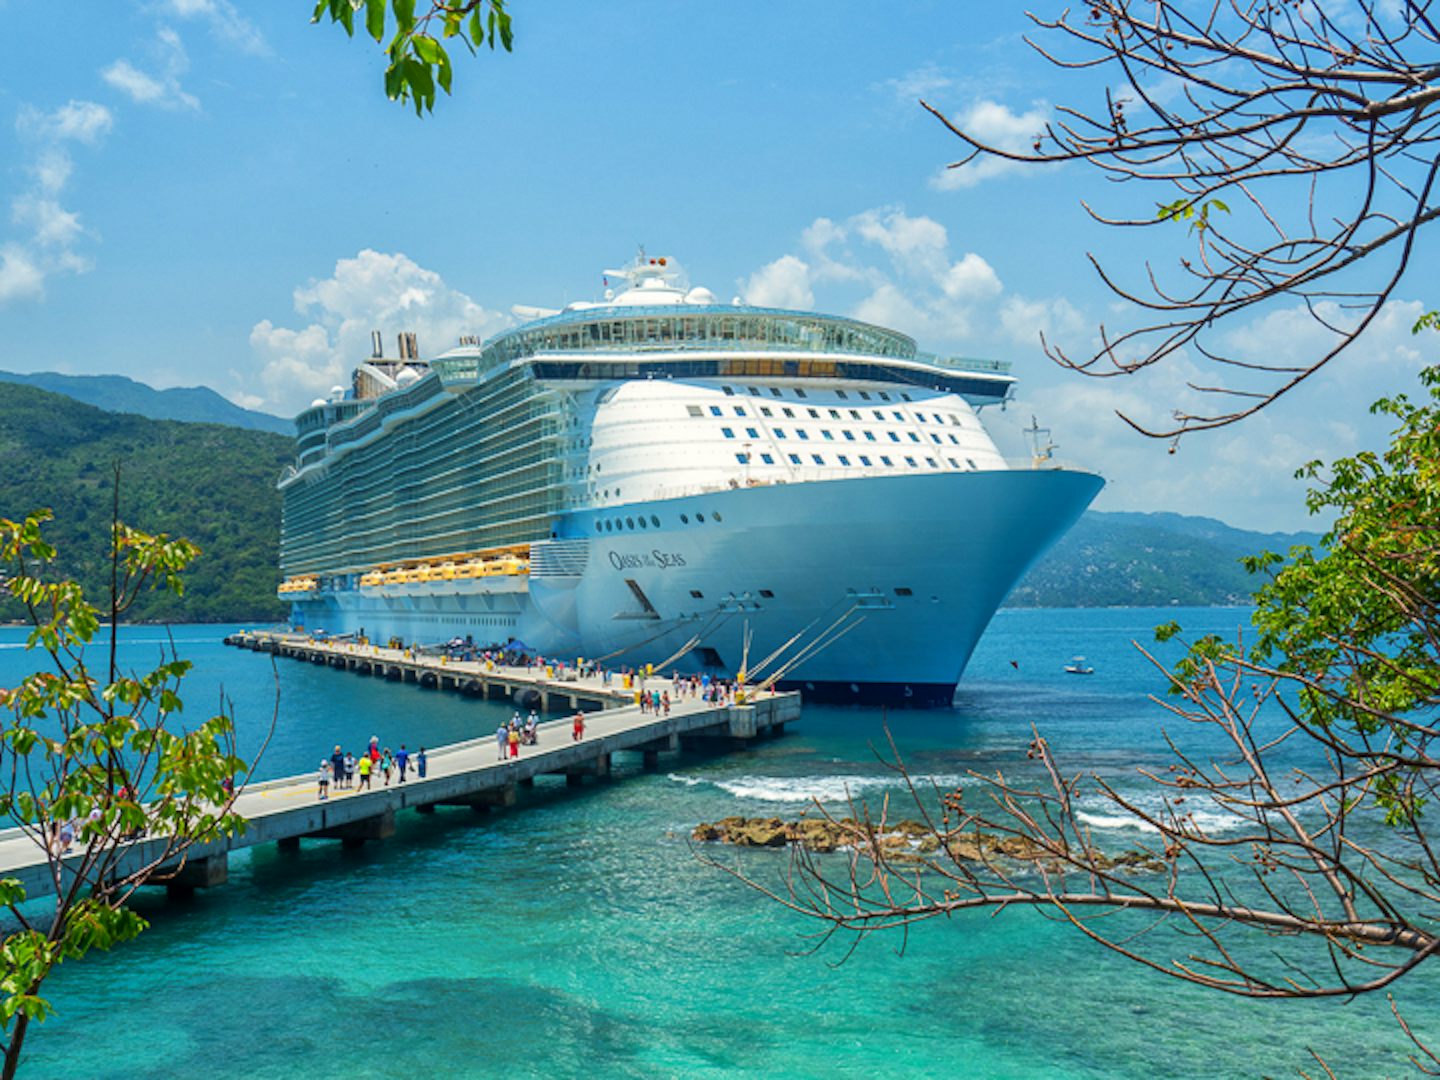 Oasis of the Sea in Labadee